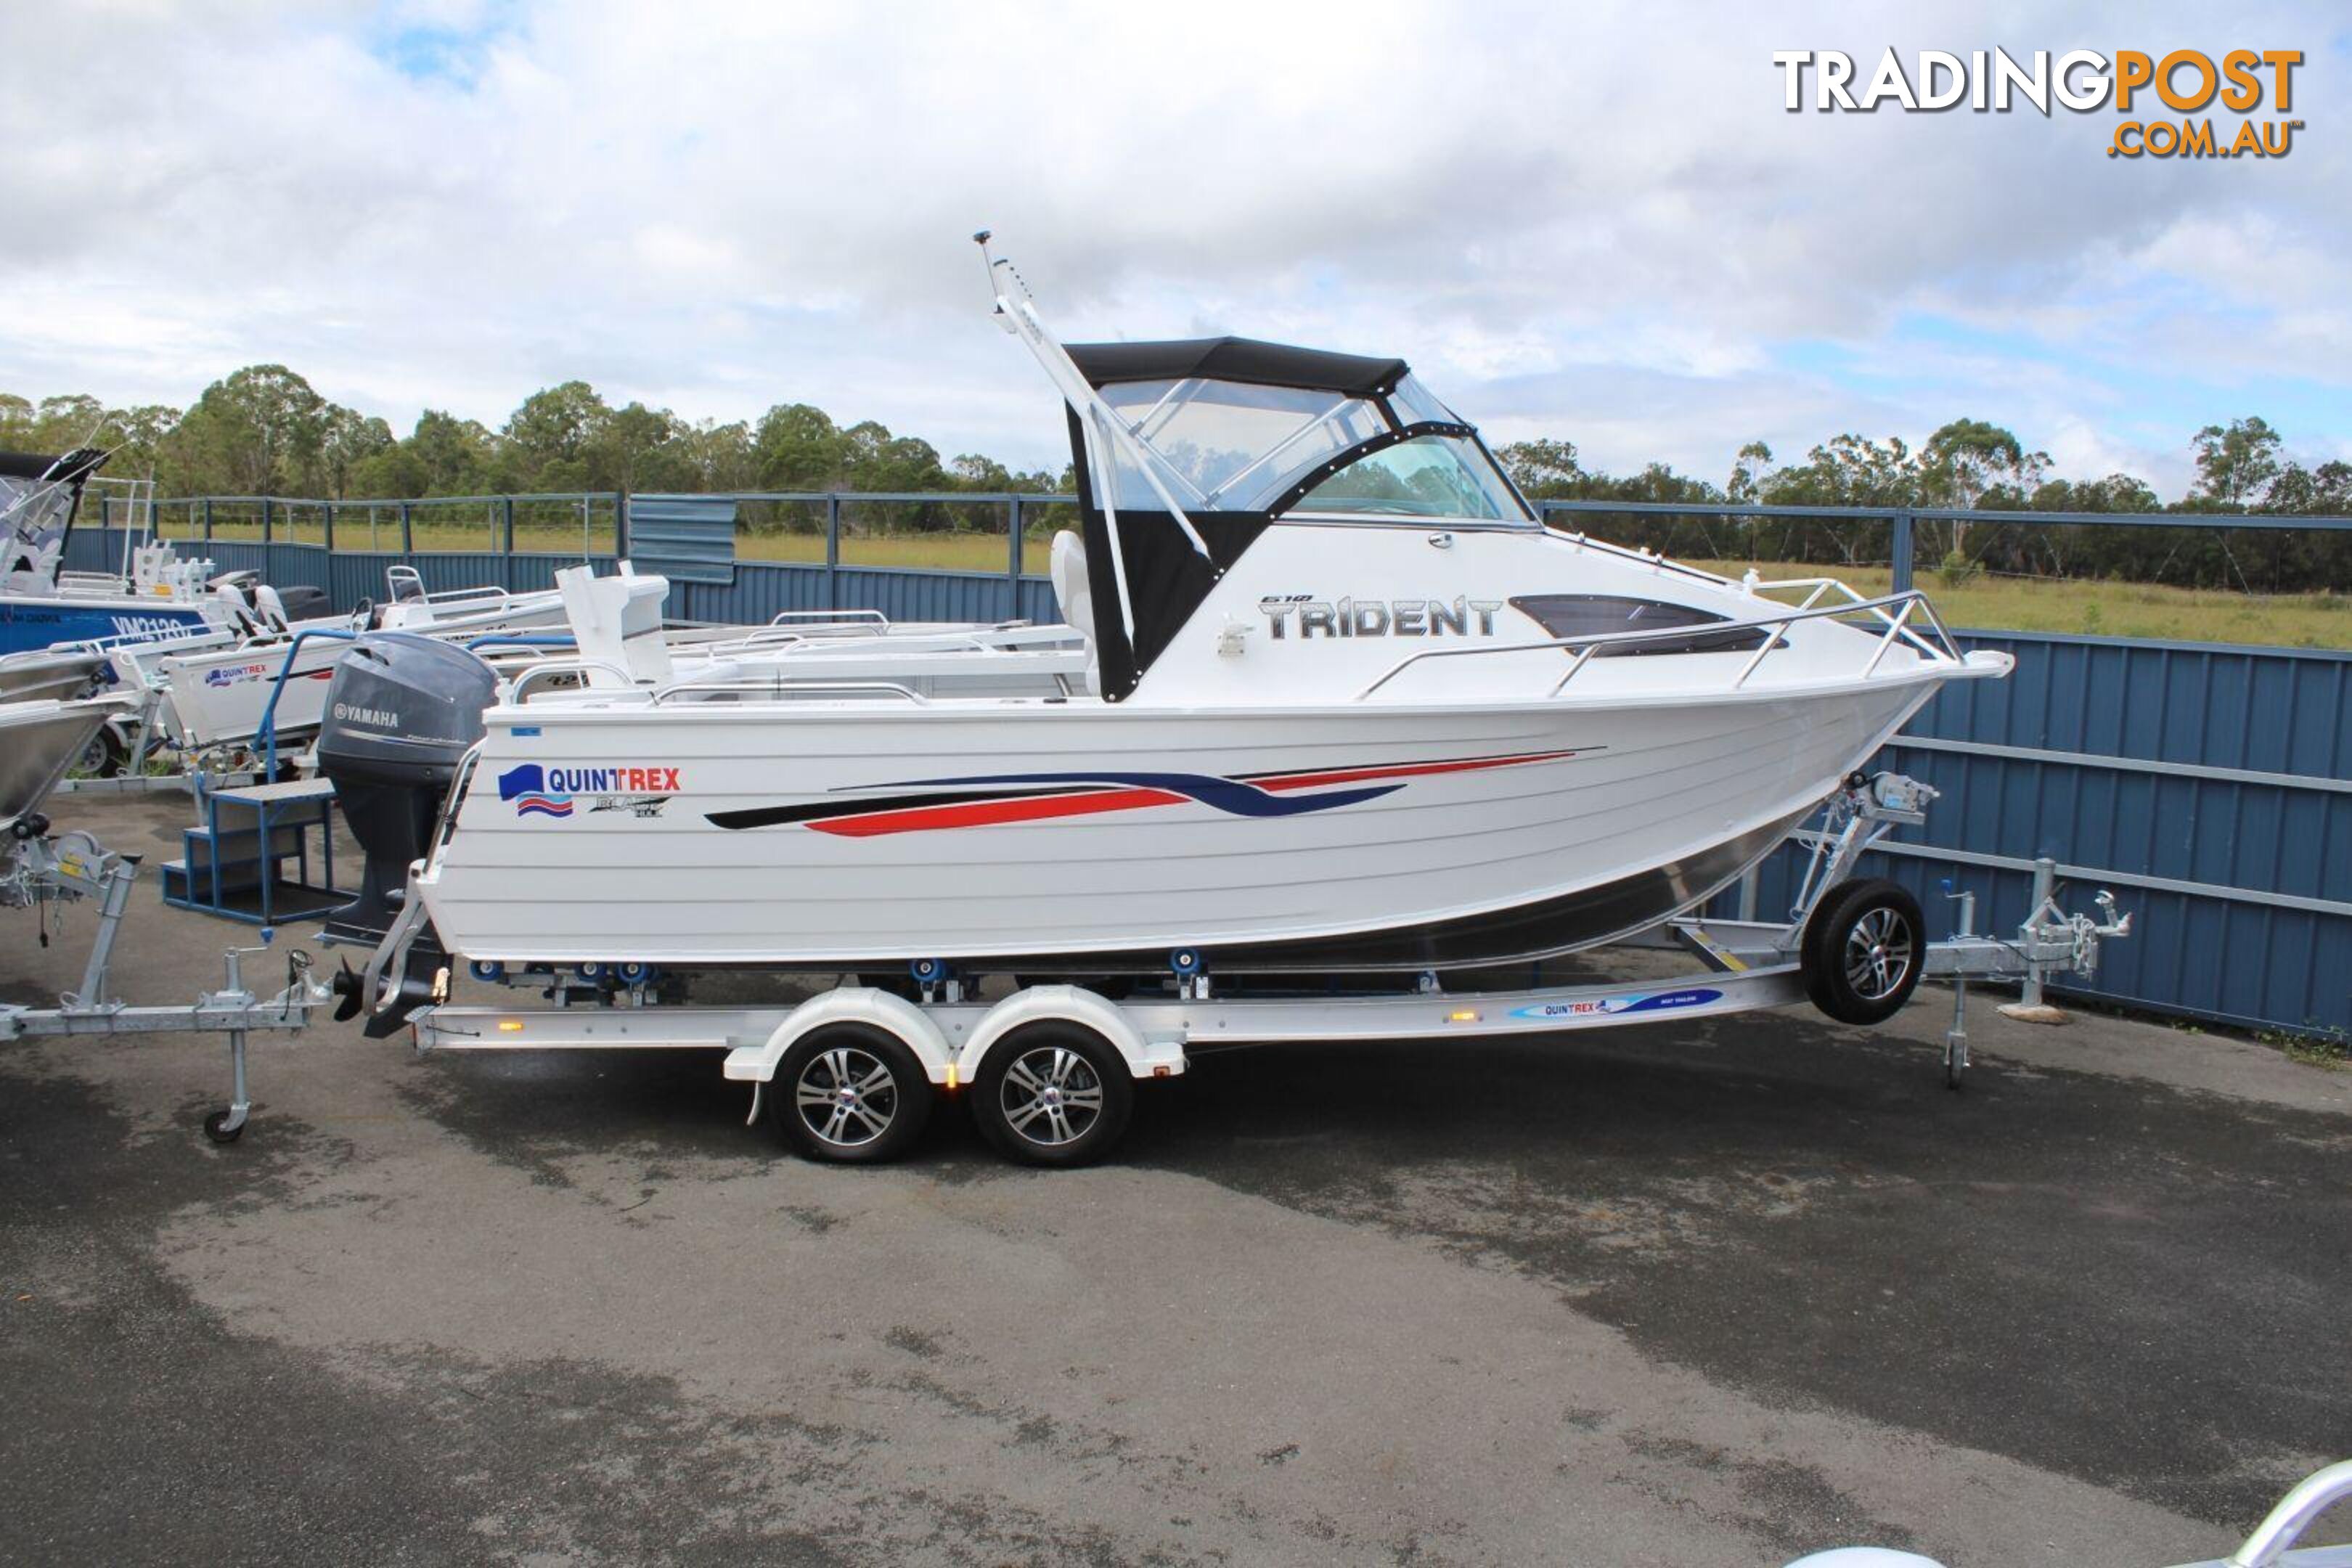 Quintrex 610 Trident + Yamaha F130hp 4-Stroke - Pack 2 for sale online prices